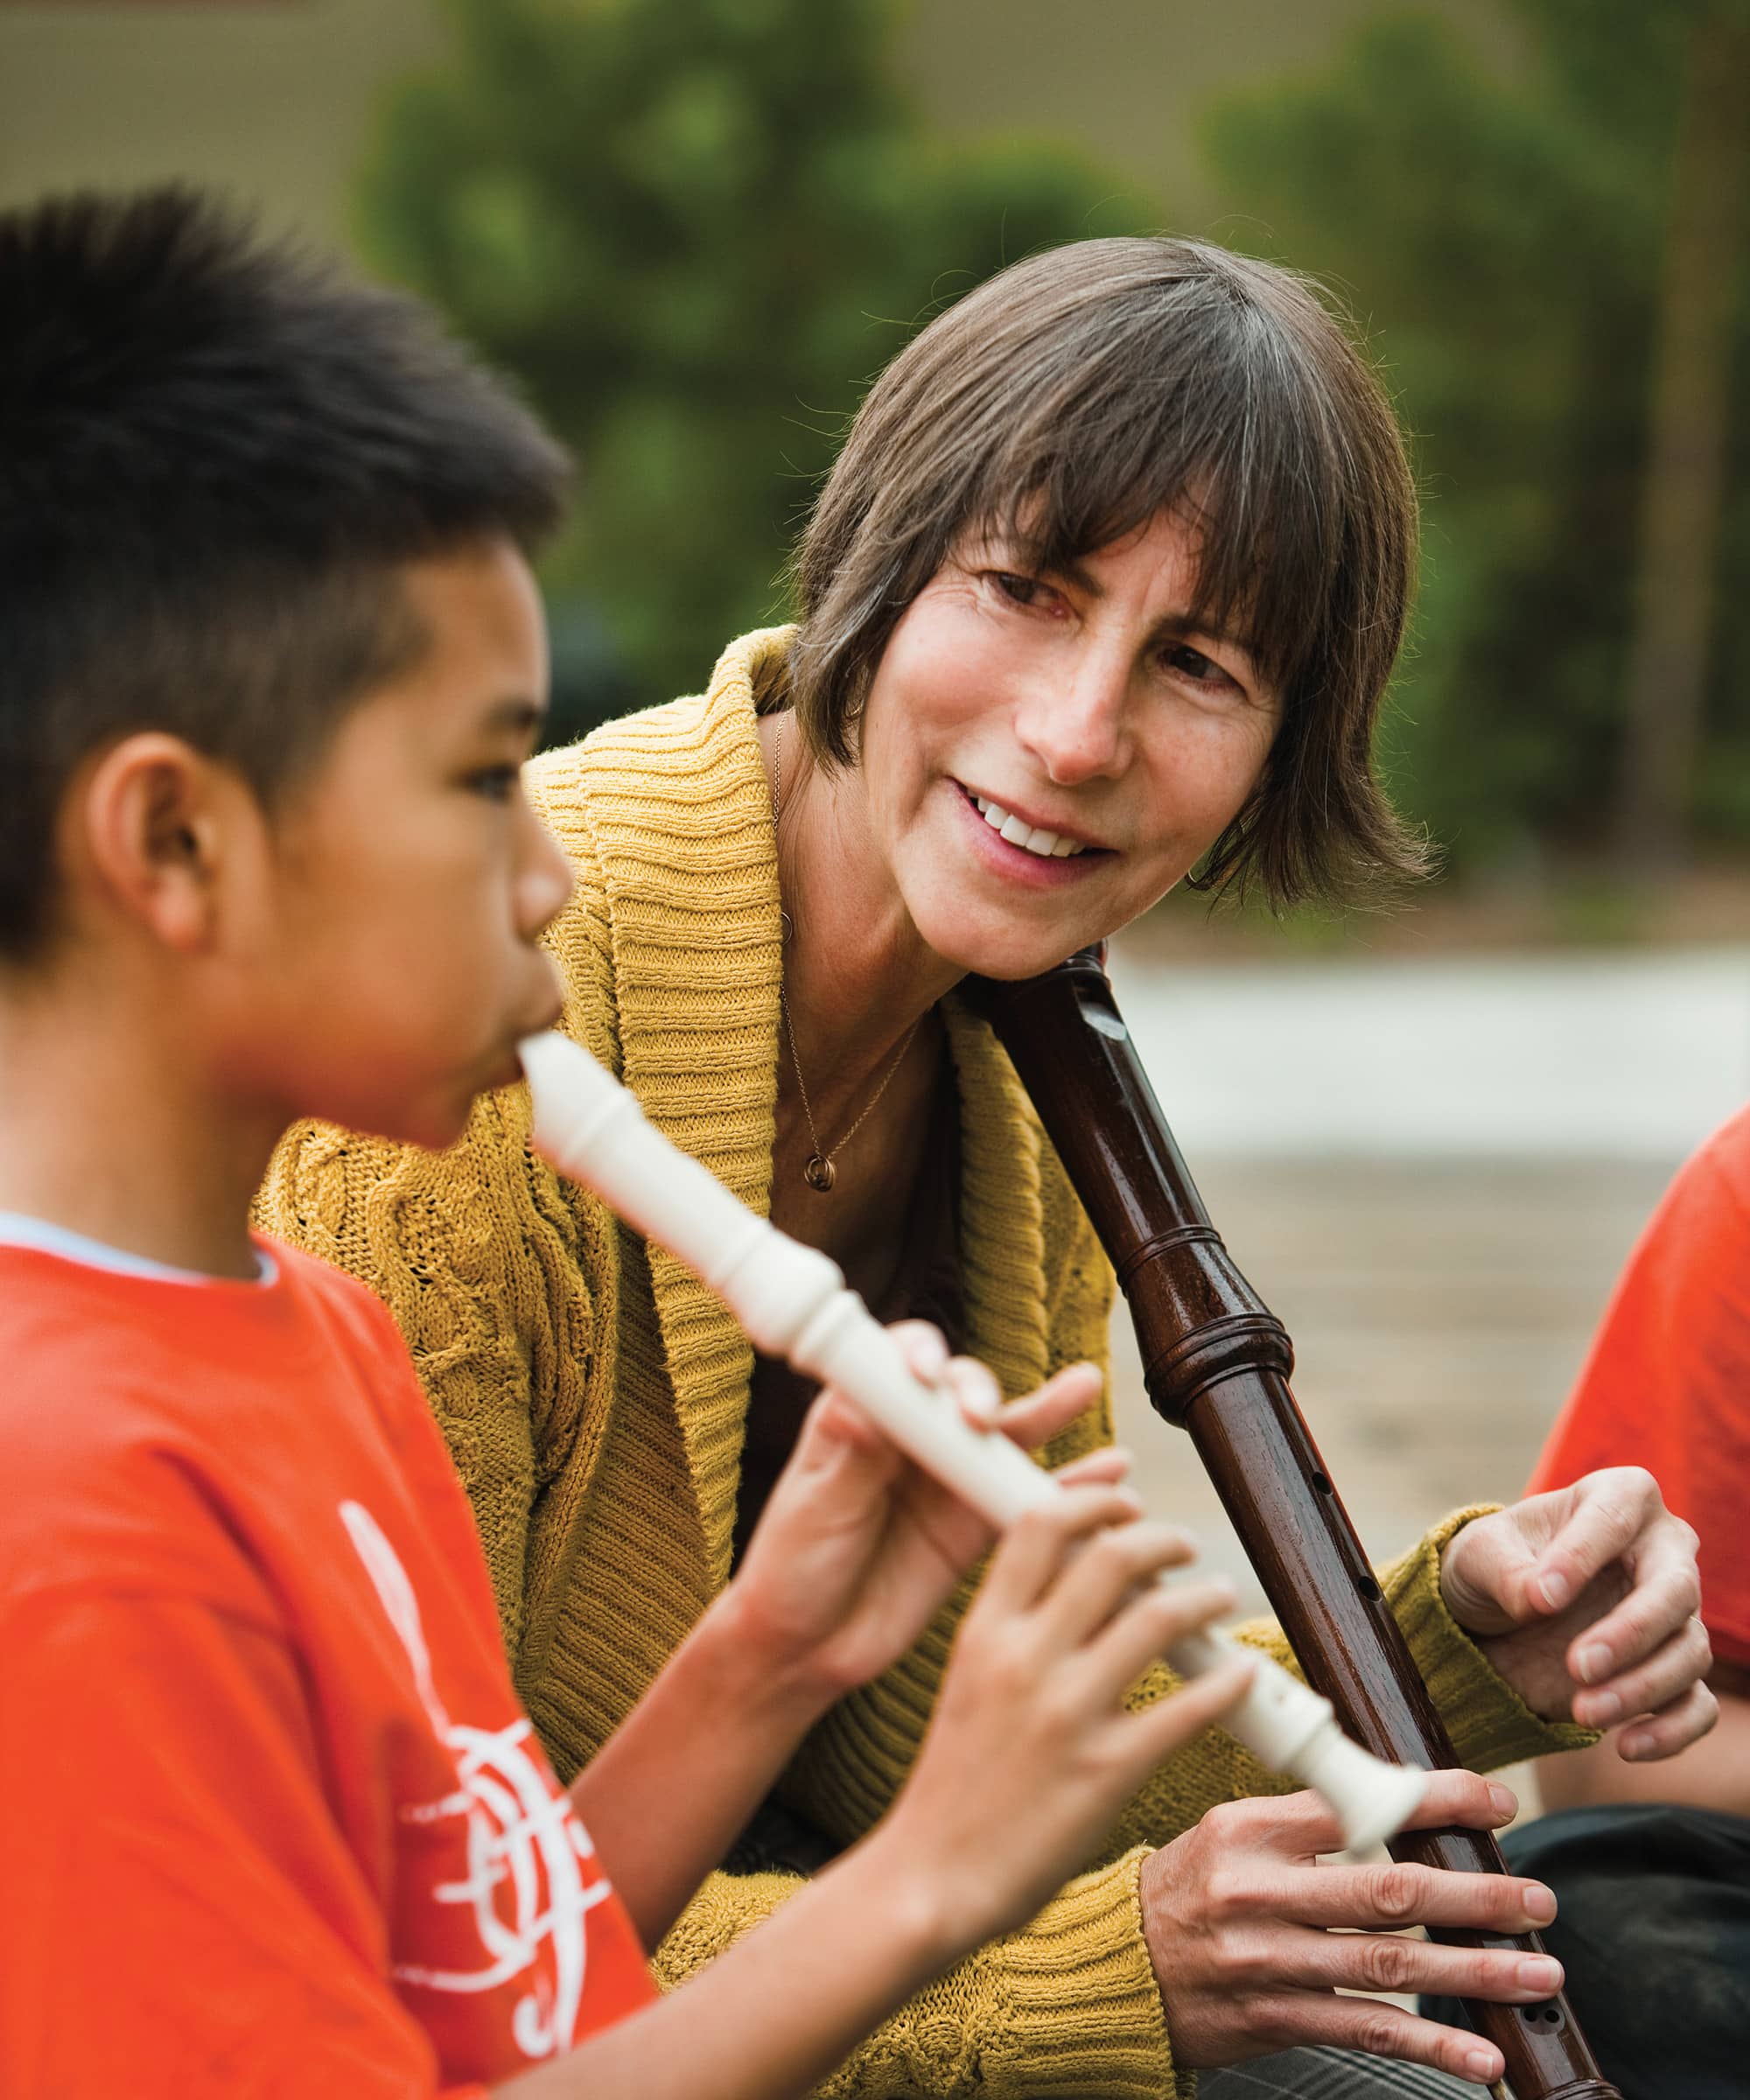 Adult with a flute watching a child play a flute